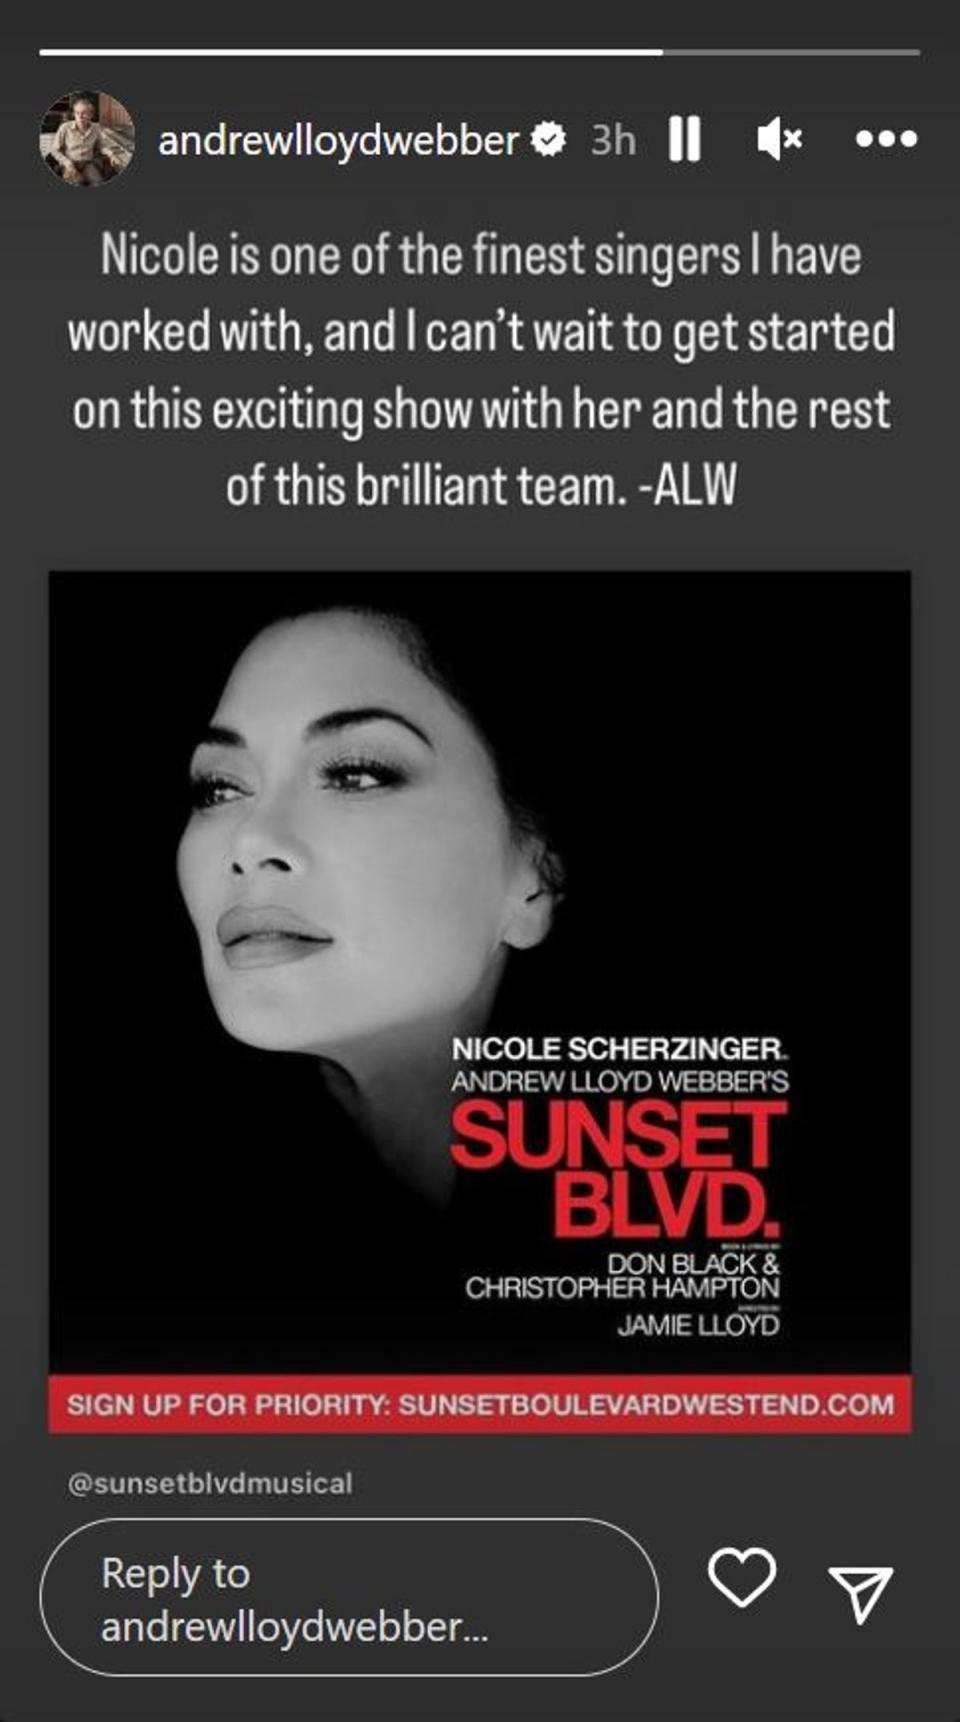 Lord Andrew Lloyd Webber praised Nicole Scherzinger in a post shared to his Instagram account (Instagram)